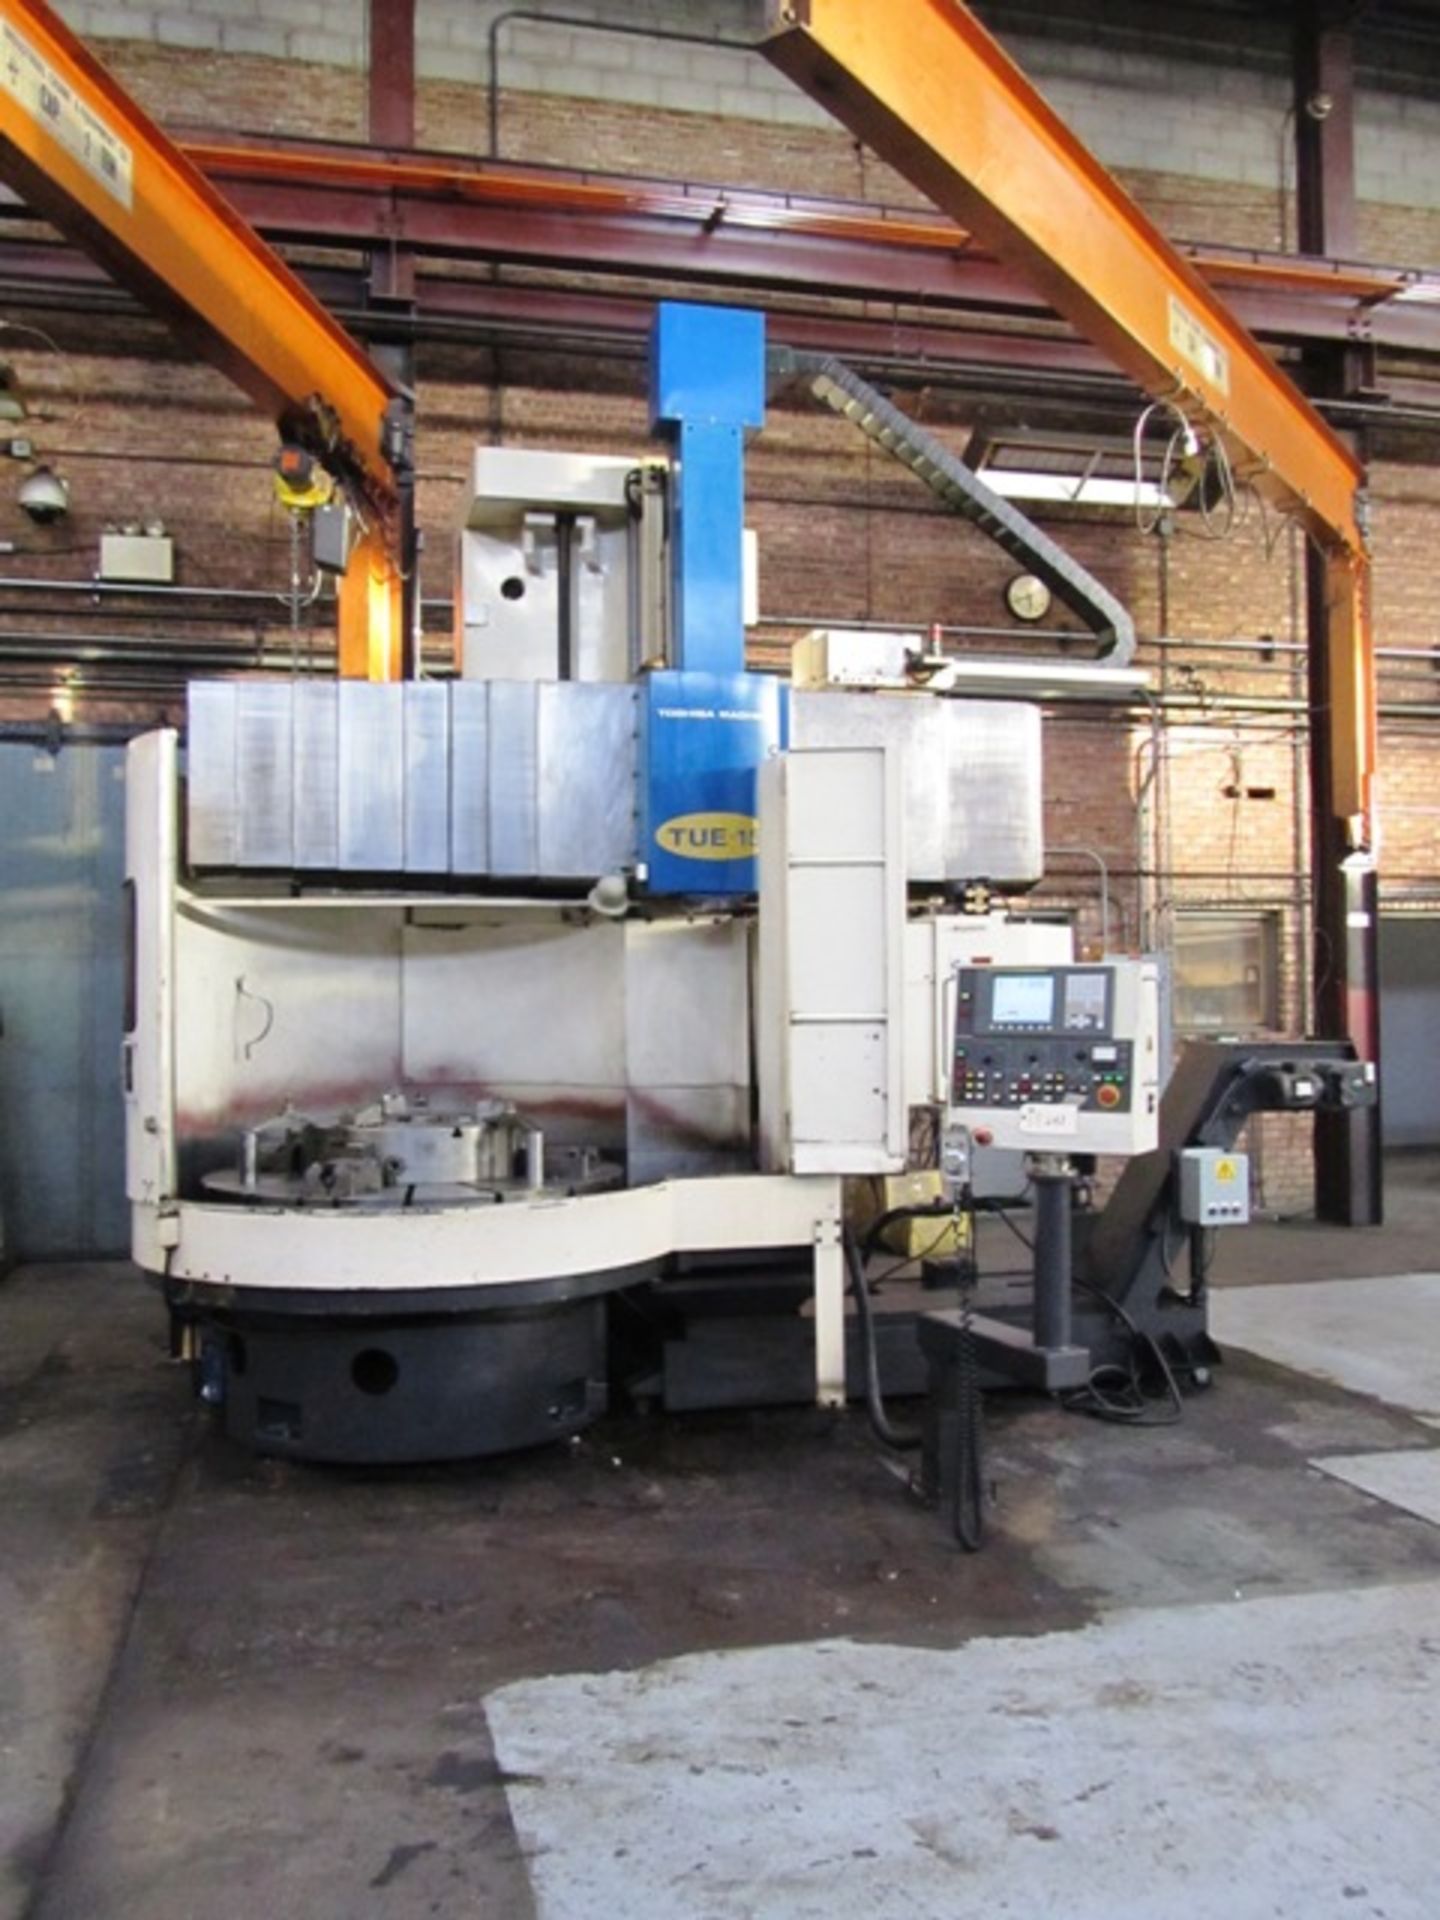 Toshiba TUE-15 12-ATC CNC Vertical Boring Mill with 59.05'' Table, 4-Jaw Chuck, 70.86'' Turning - Image 3 of 6